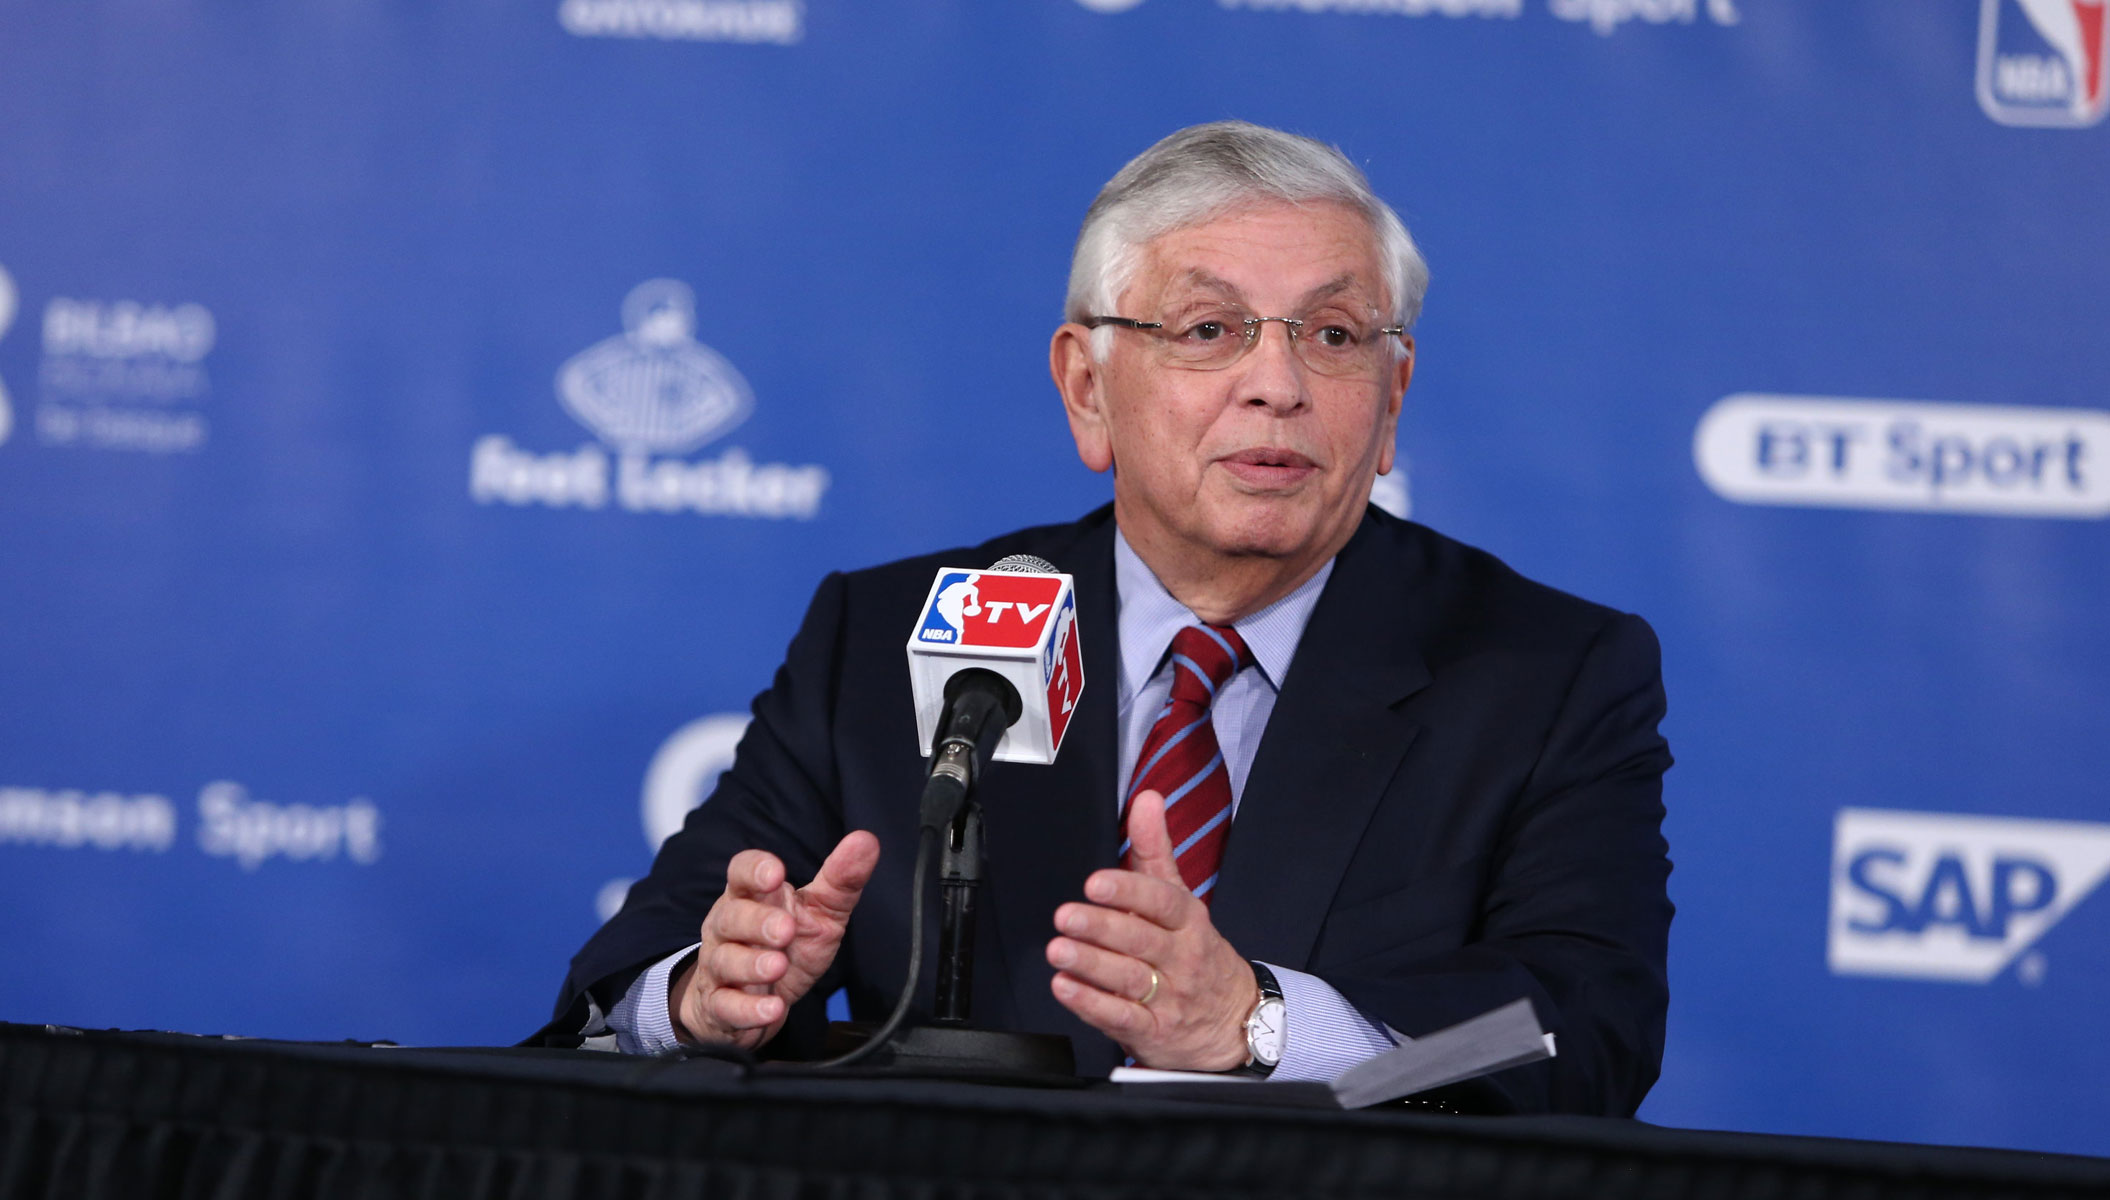 Lang’s World: A farewell to David Stern, who helped flatten the world